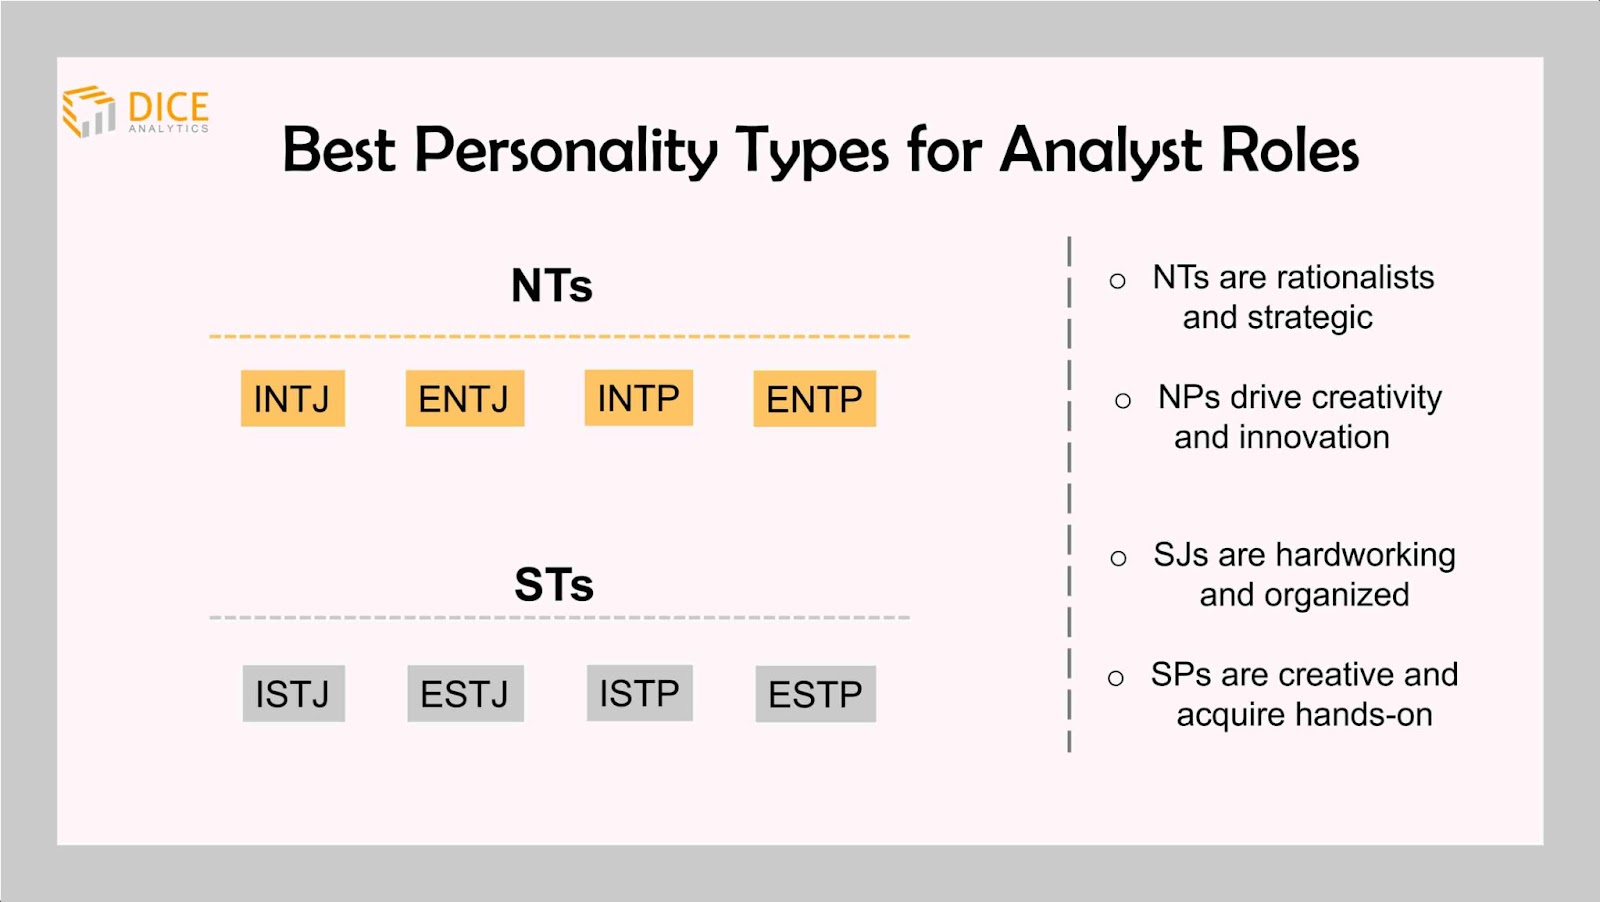 MBTI personality for data analytics, engineering, data scientist job roles